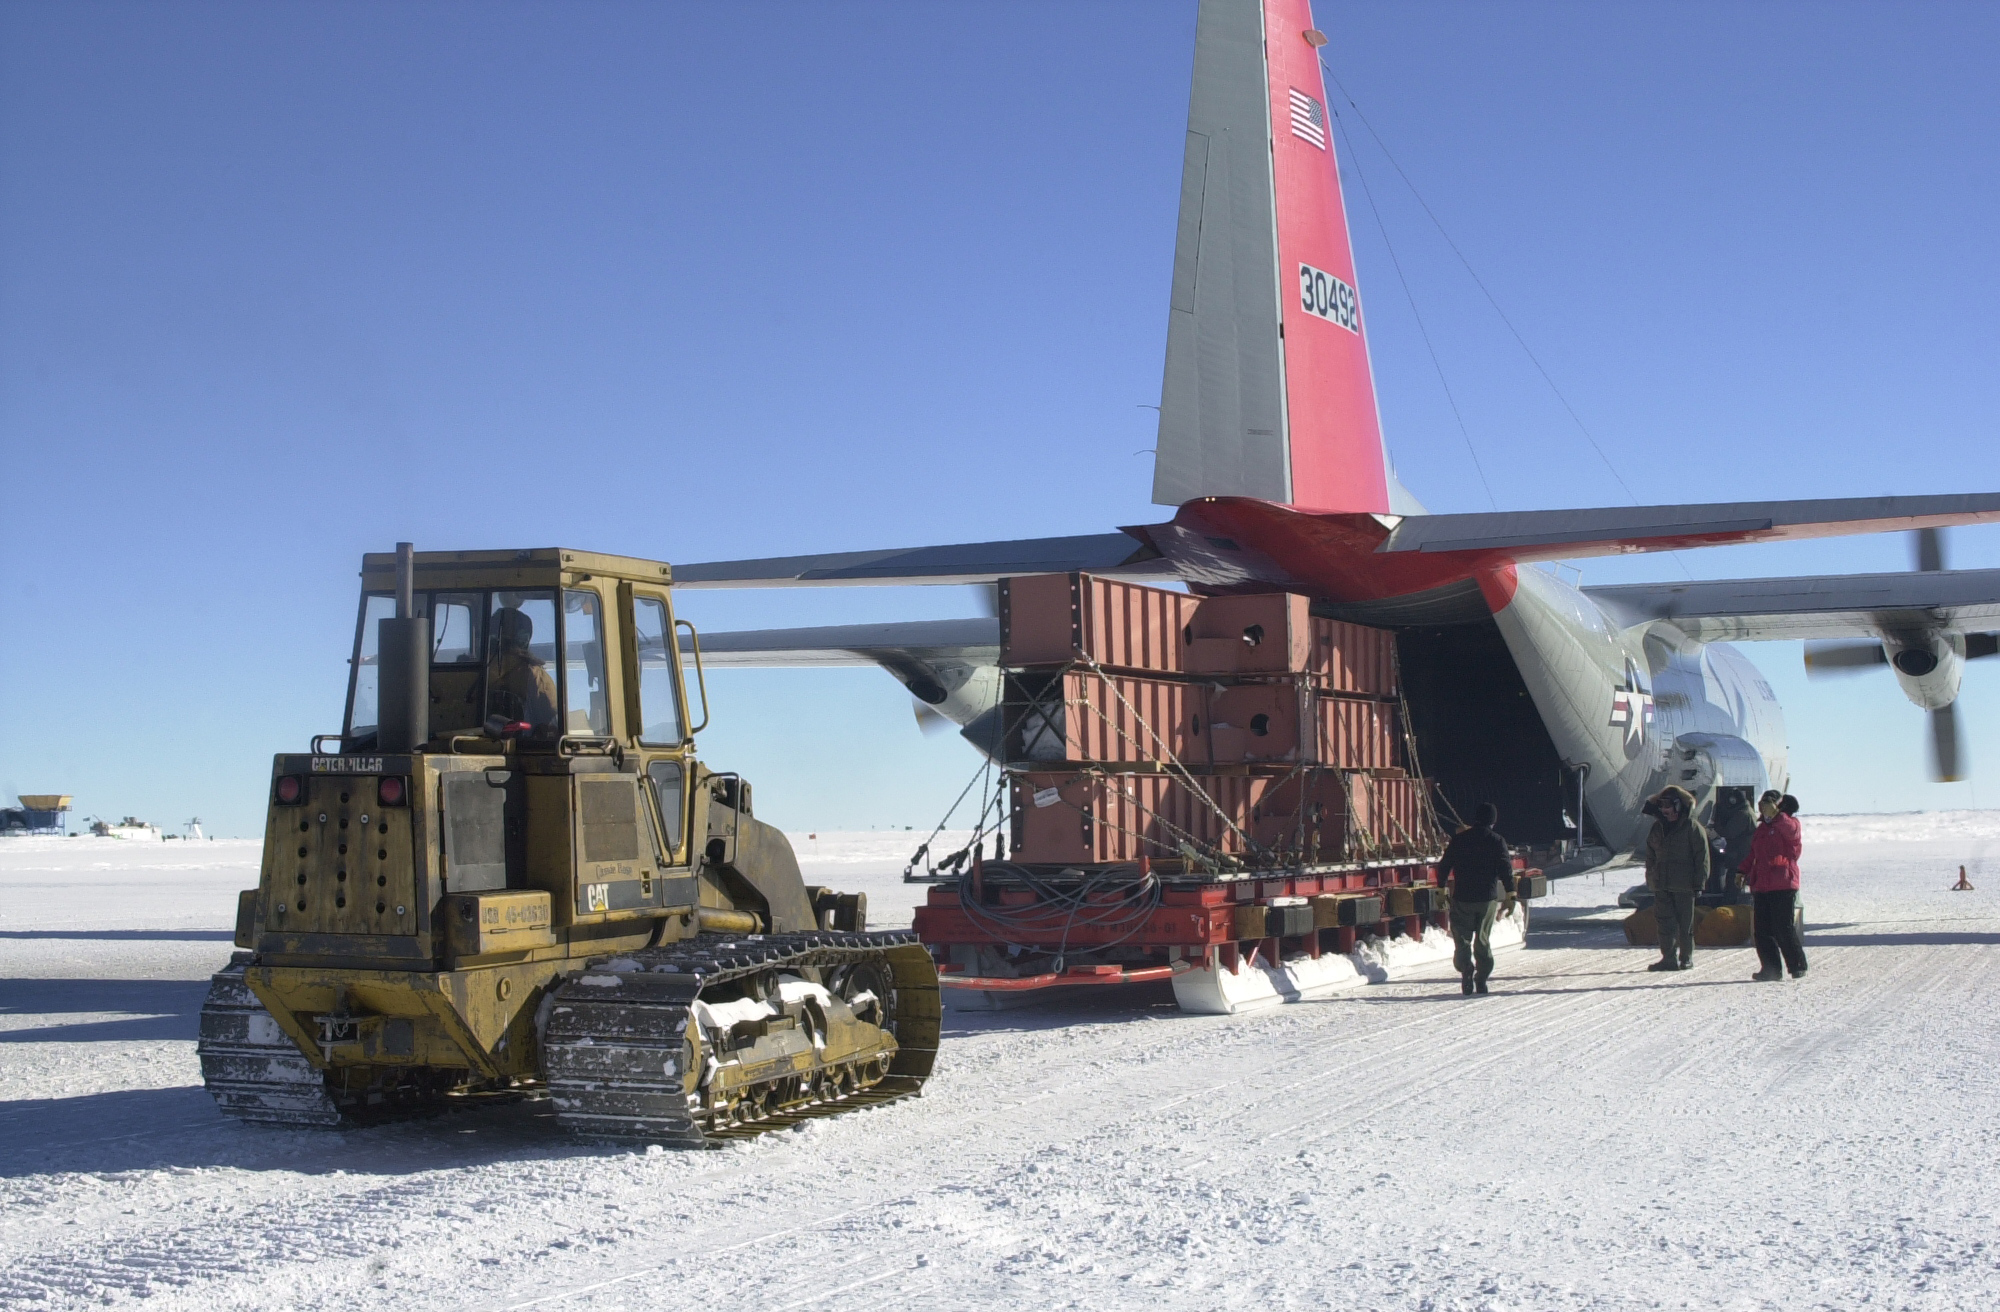 A tractor unloading cargo from the rear of an airplane.